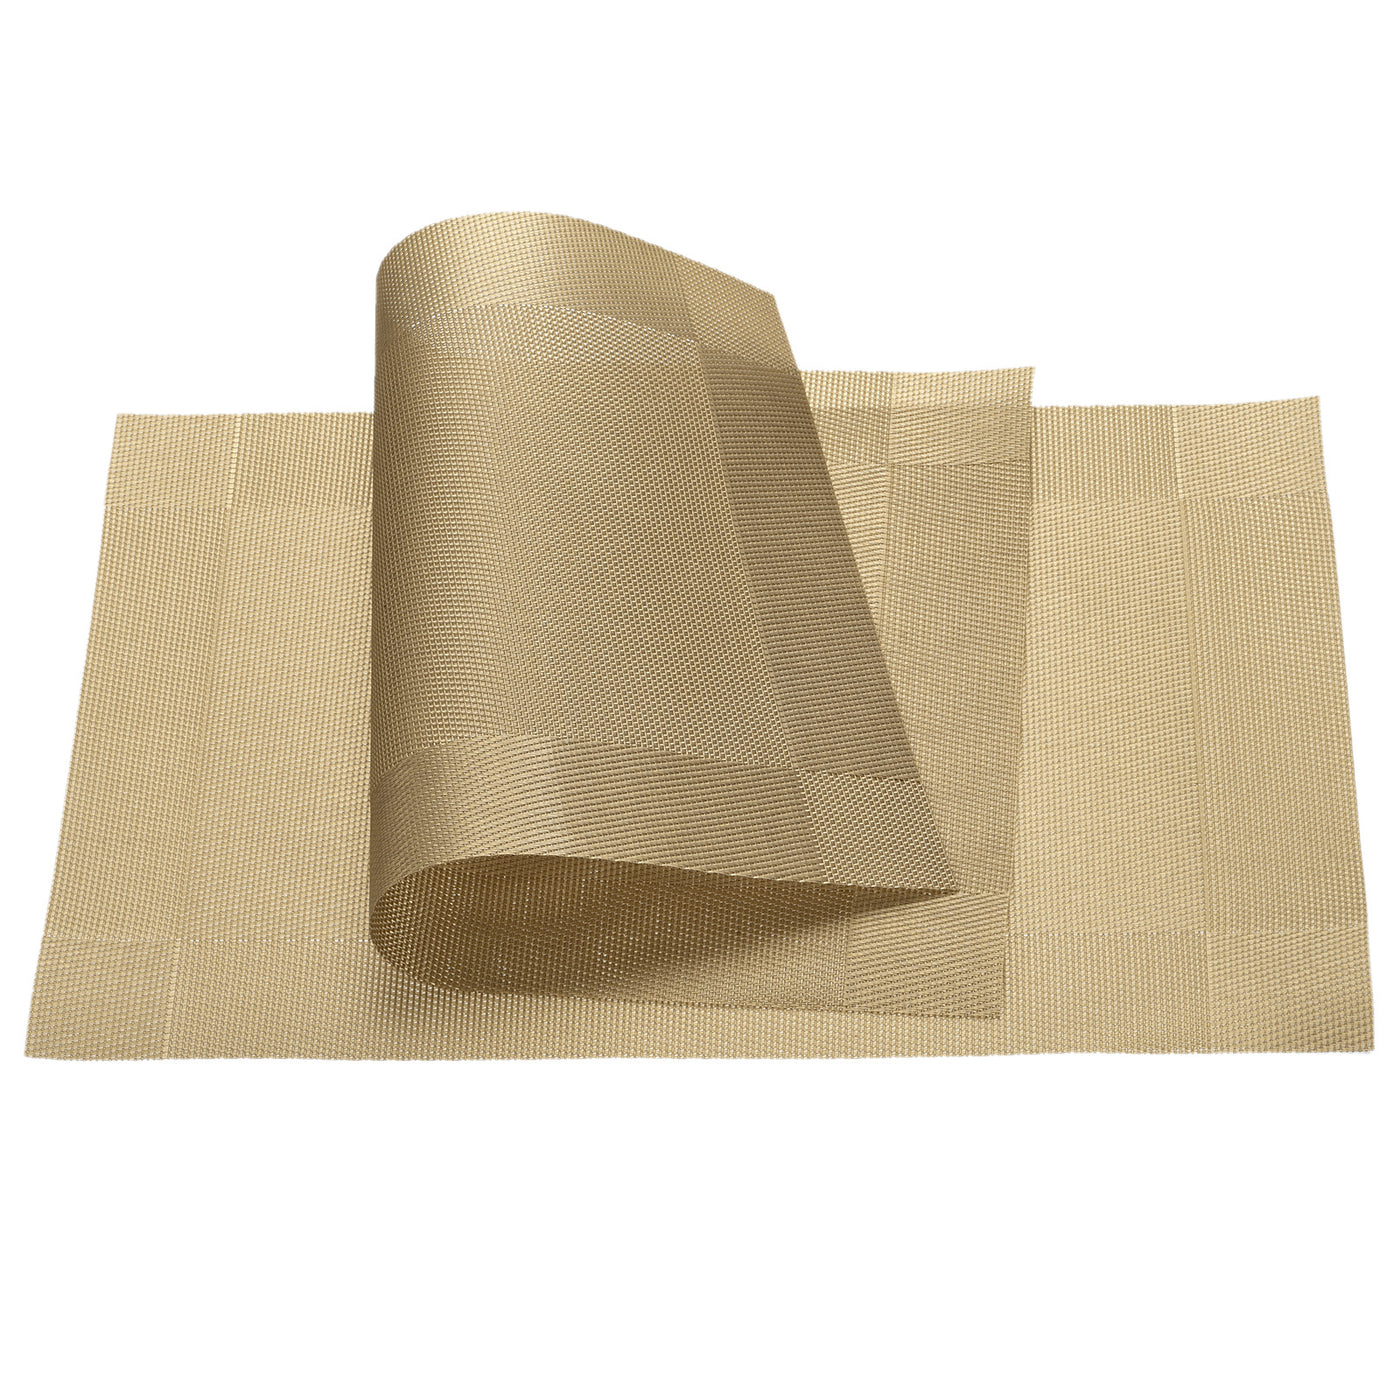 uxcell Uxcell Place Mats 450x300mm 2pcs PVC Table Washable Woven Placemat, Gold Tone